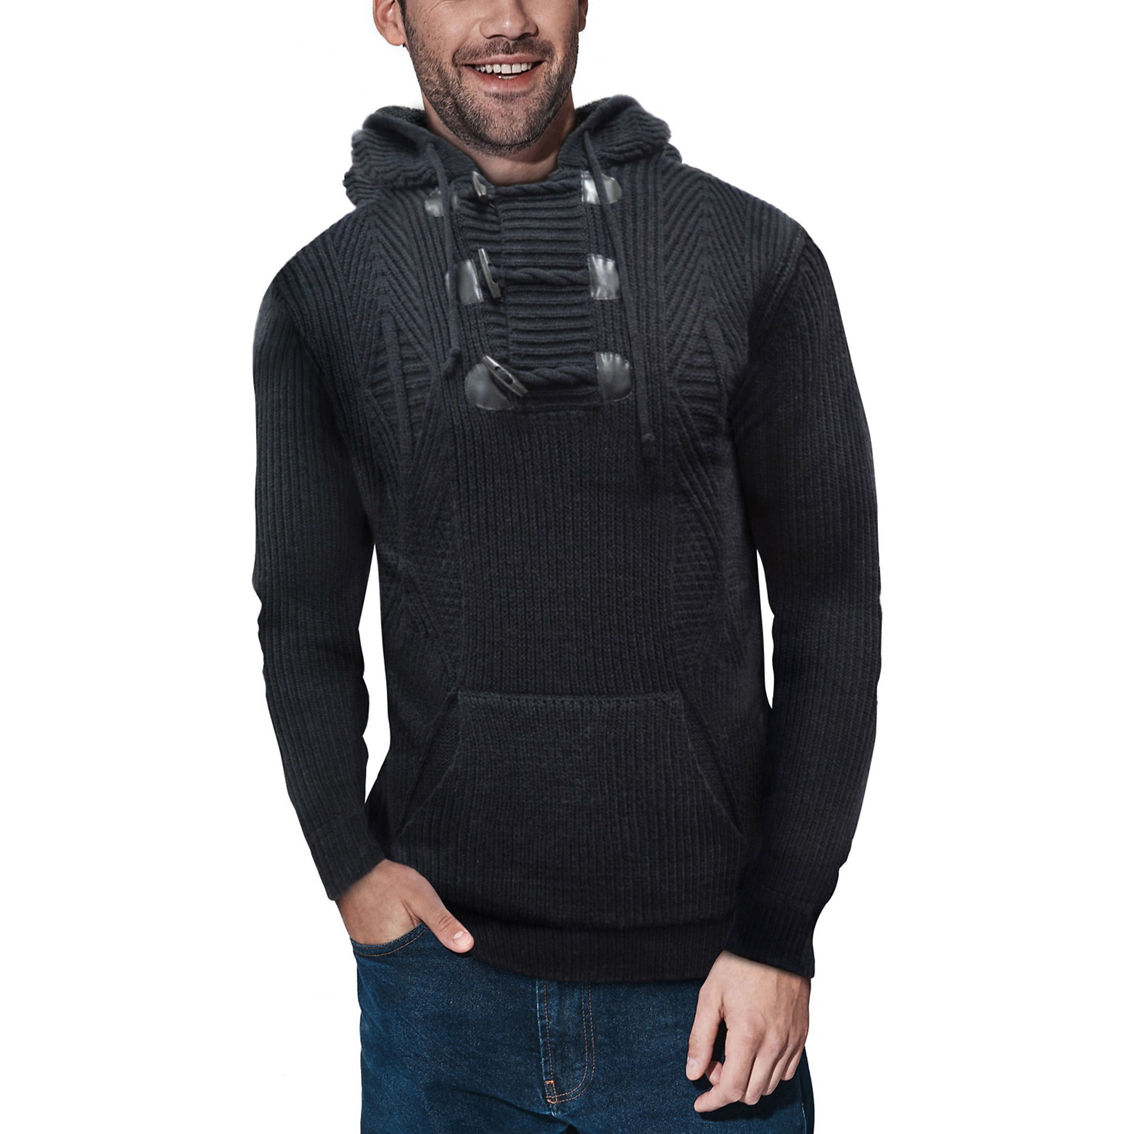 Men's Hooded Toggle Sweater | Shirts | Clothing & Accessories | Shop ...